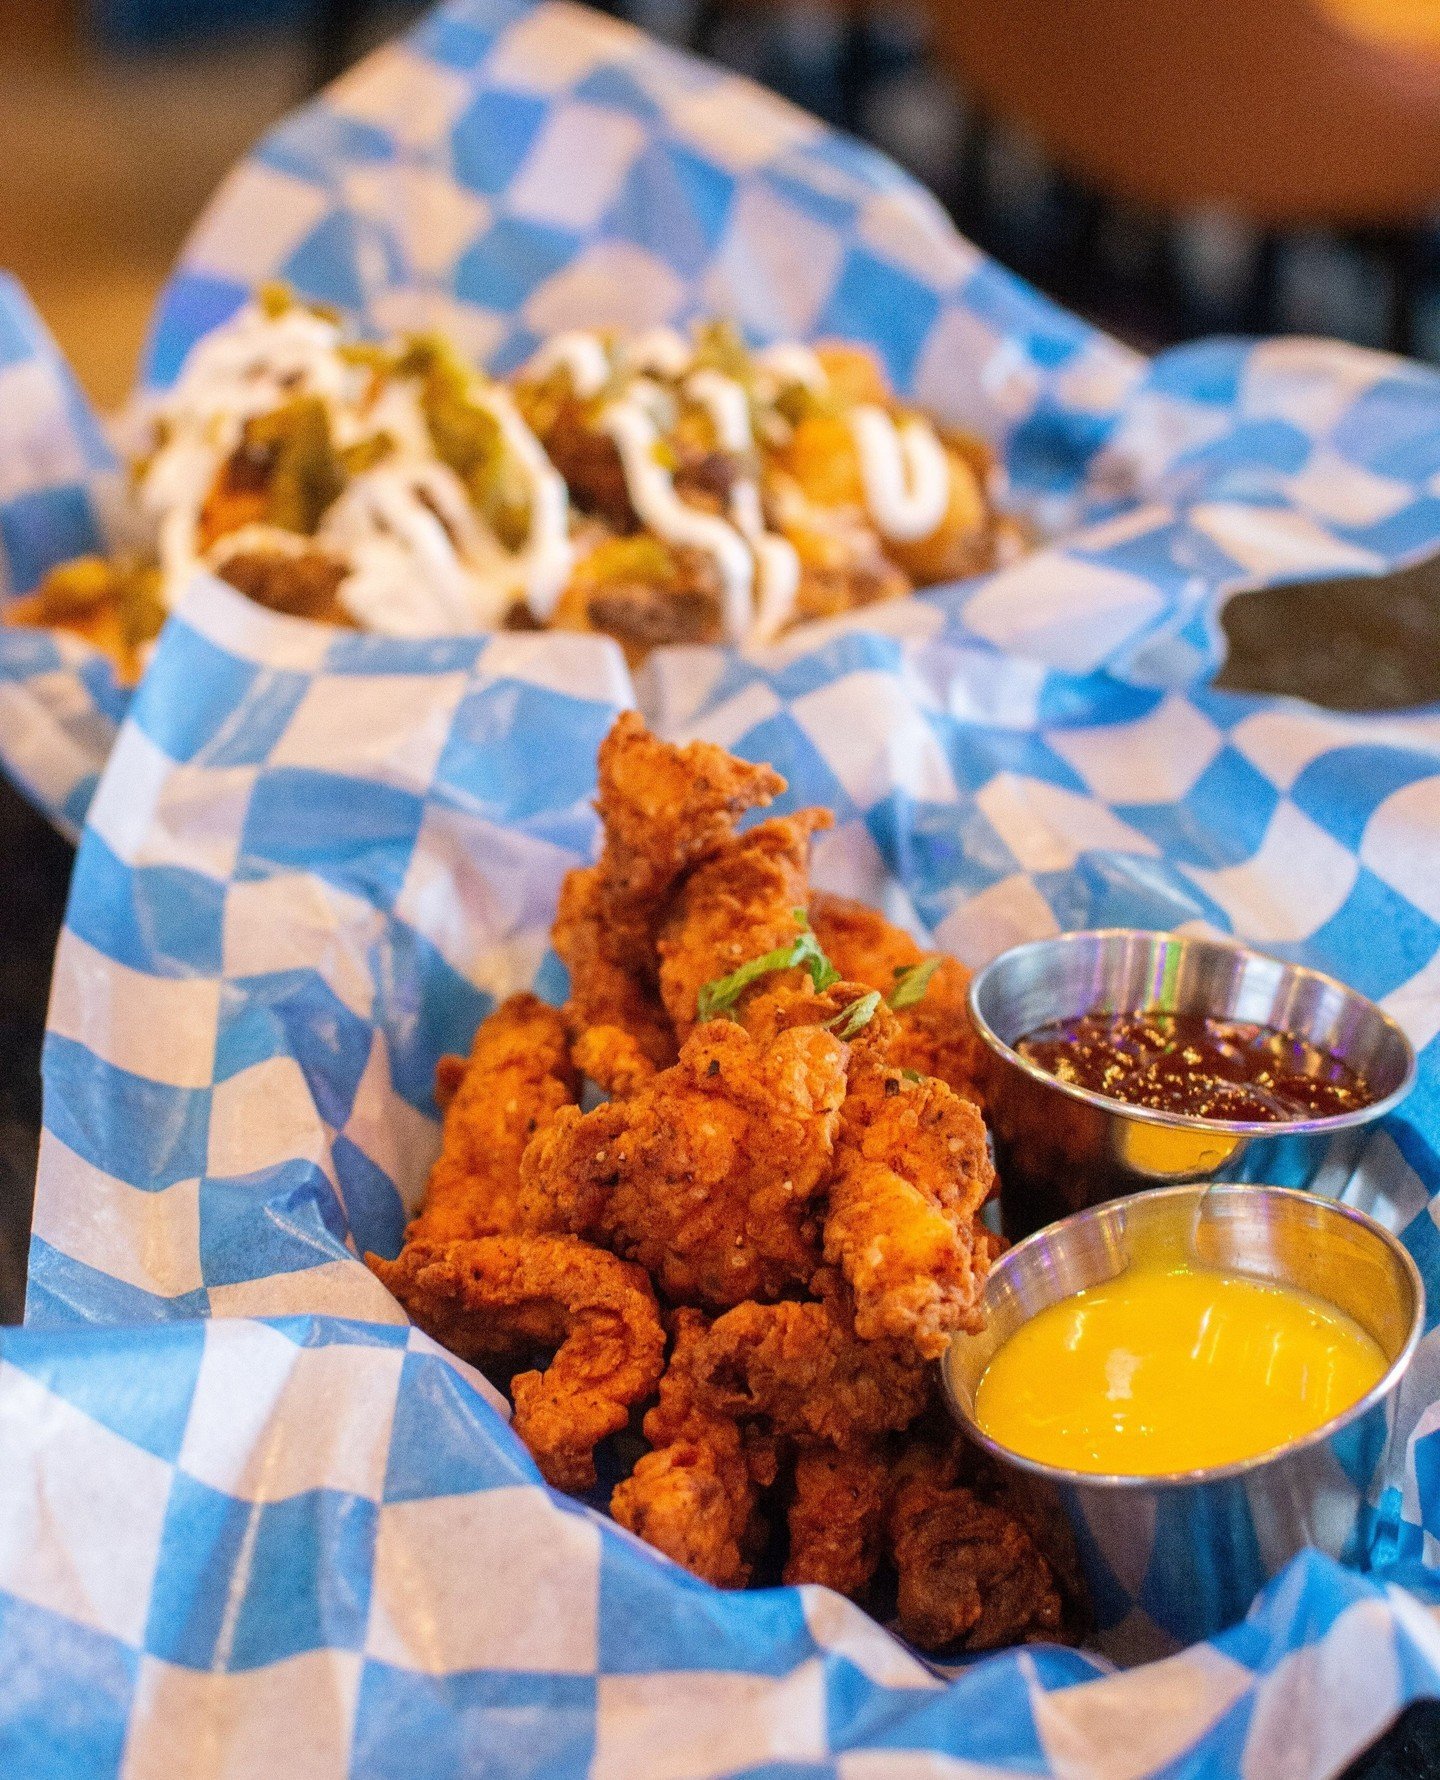 Happy Hour Mondays at Moonlighter means chicken and loaded tots. Oh, and beer of course. The Cubs game is on at 6:10pm and the White Sox at 6:40! Come get deals on food and drinks all night while you root for your team! We&rsquo;re here until Midnigh